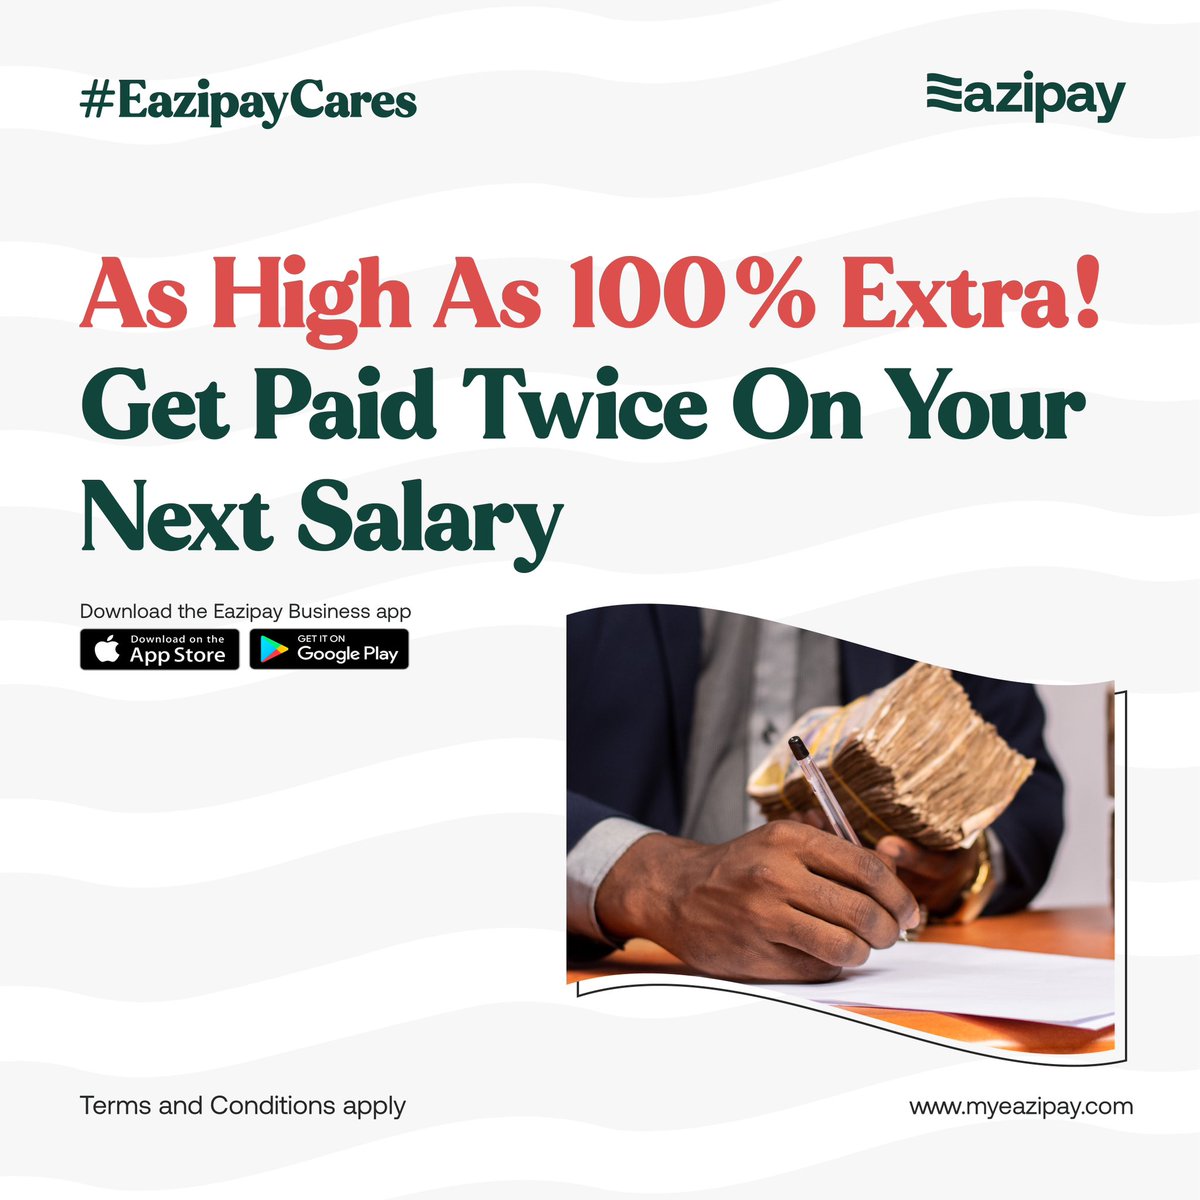 Don't miss out on the chance to earn some extra cash this month. Head over to myeazipay.com to learn how to earn up to 100% extra on your salary🫵

#EazipayCares #WorkersDay #PayrollMadeEasy #BusinessSupport